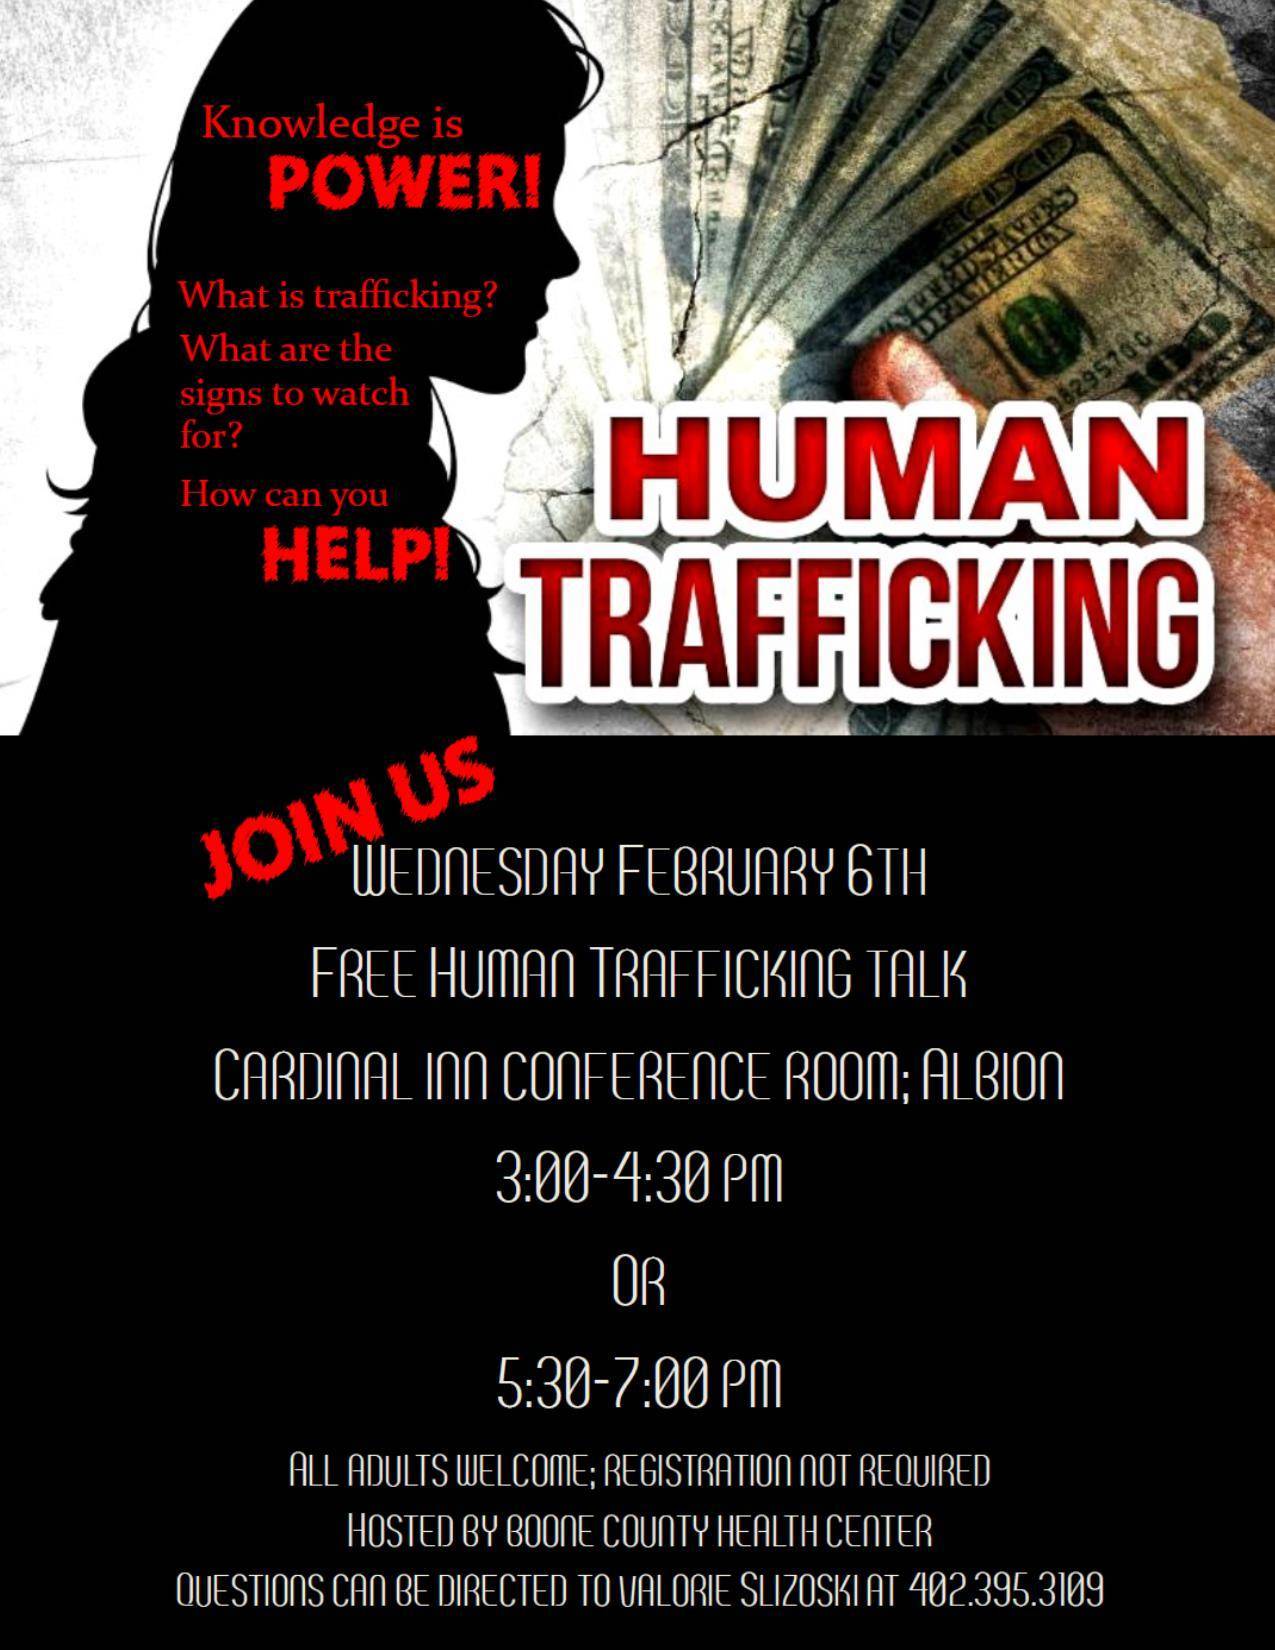 Human Sex Trafficking Flyer Boone County Health Center 4367